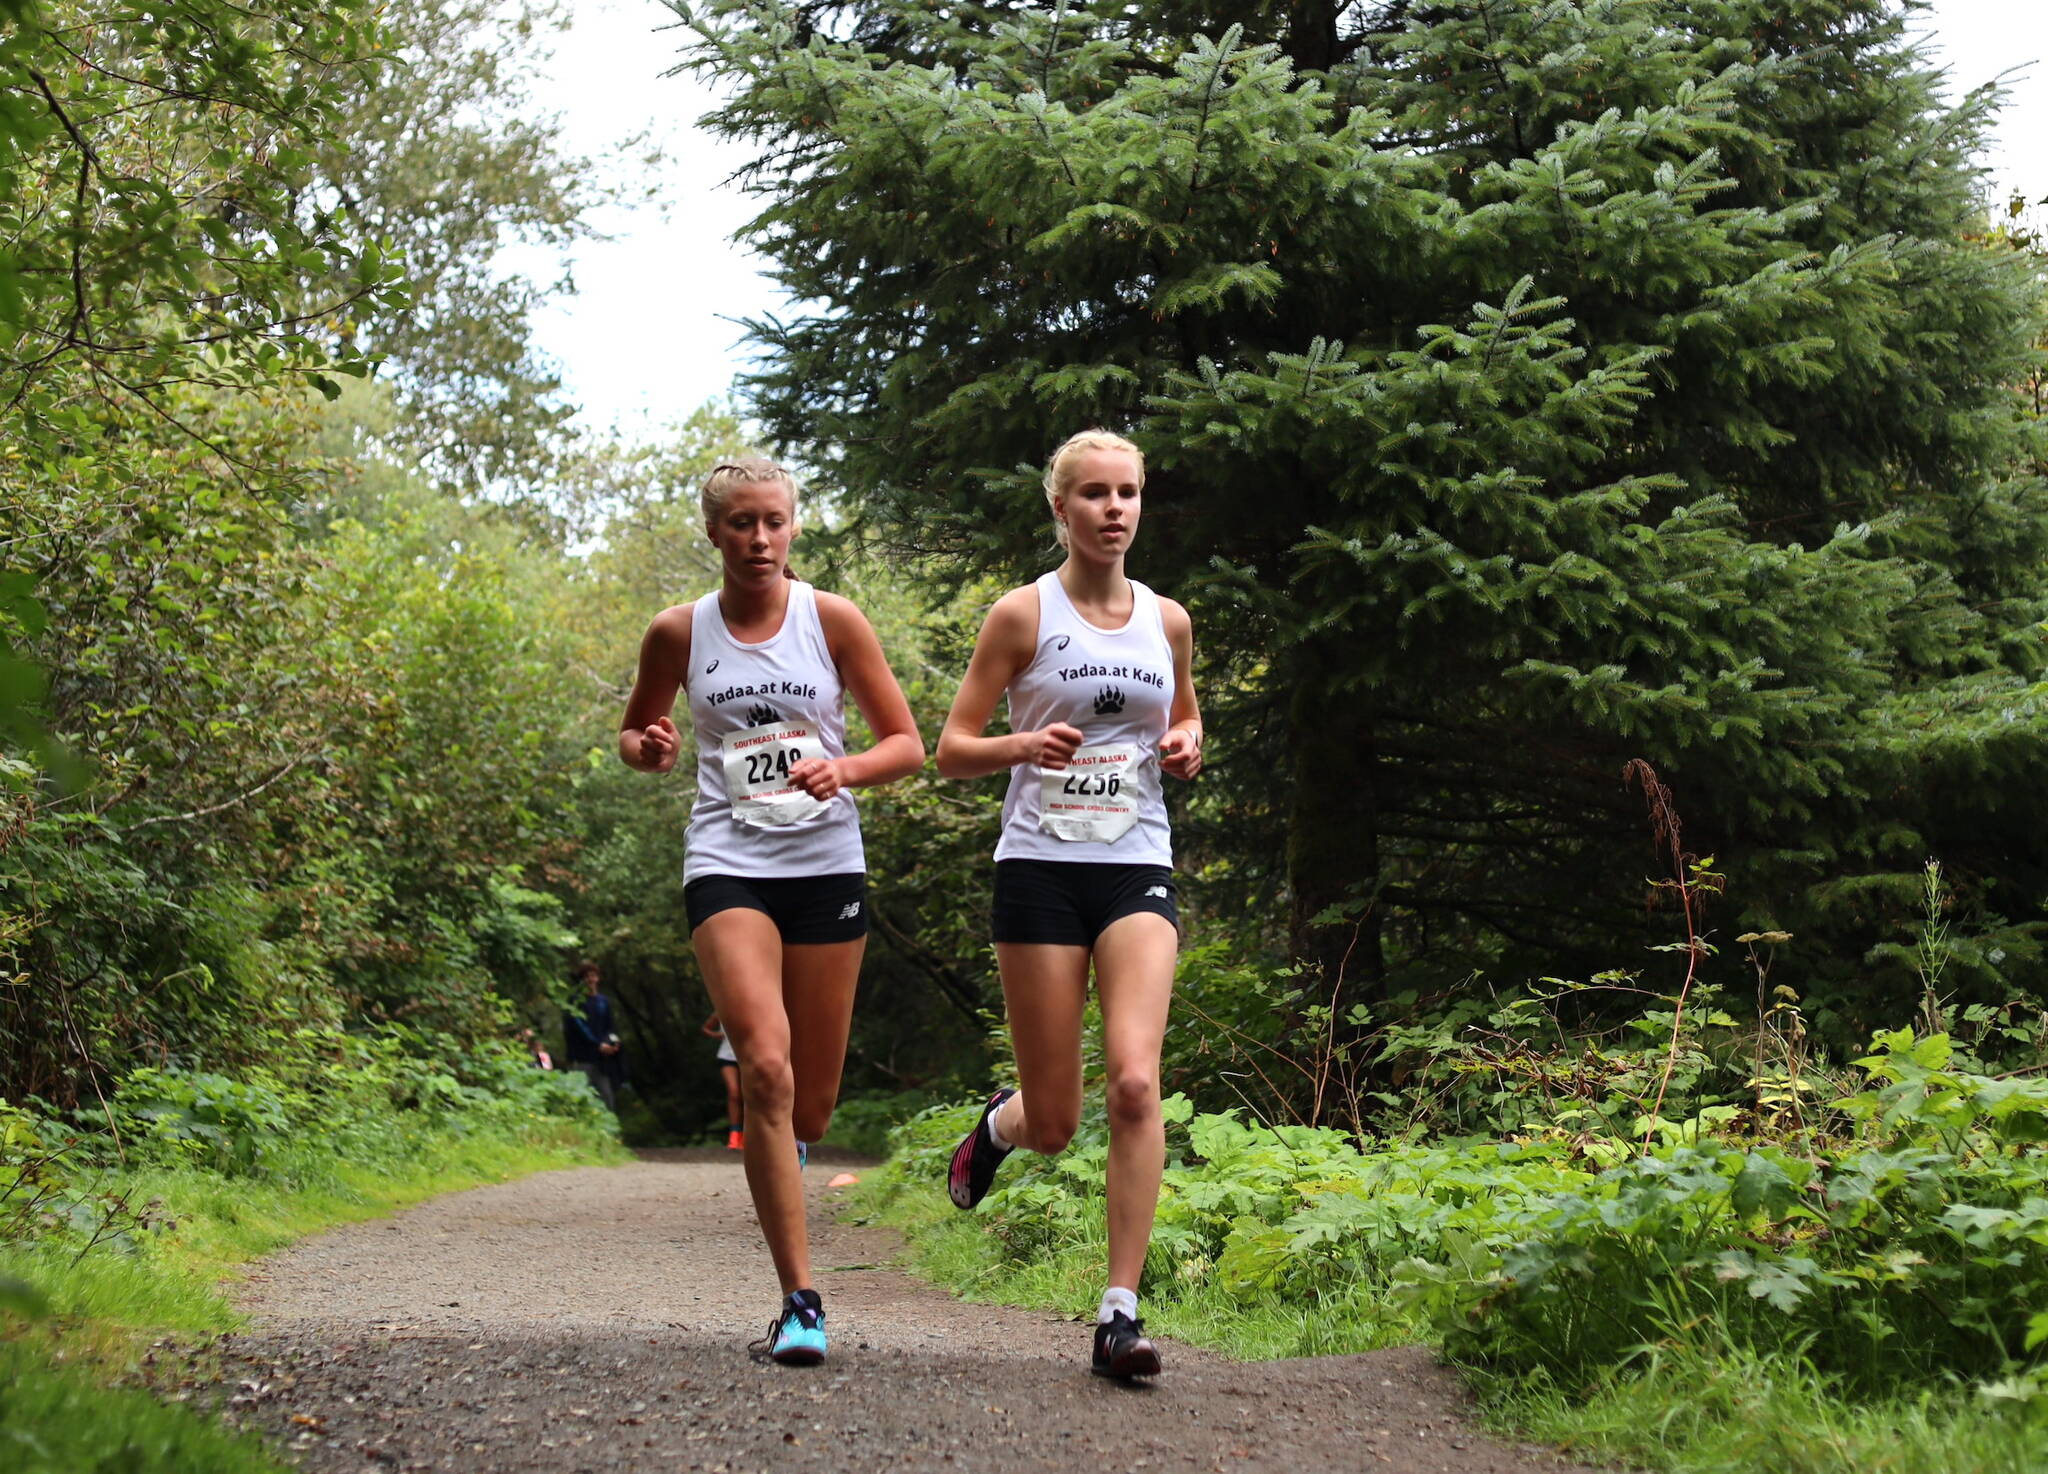 Juneau-Douglas High School: Yadaa.at Kalé senior captain Etta Eller (left) and junior Ida Meyer (right) run in tandem during the Sayeik Invitational on Douglas Saturday morning. Meyer finished first in the girls race with a time of 19 minutes and 42 seconds. (Clarise Larson / Juneau Empire)